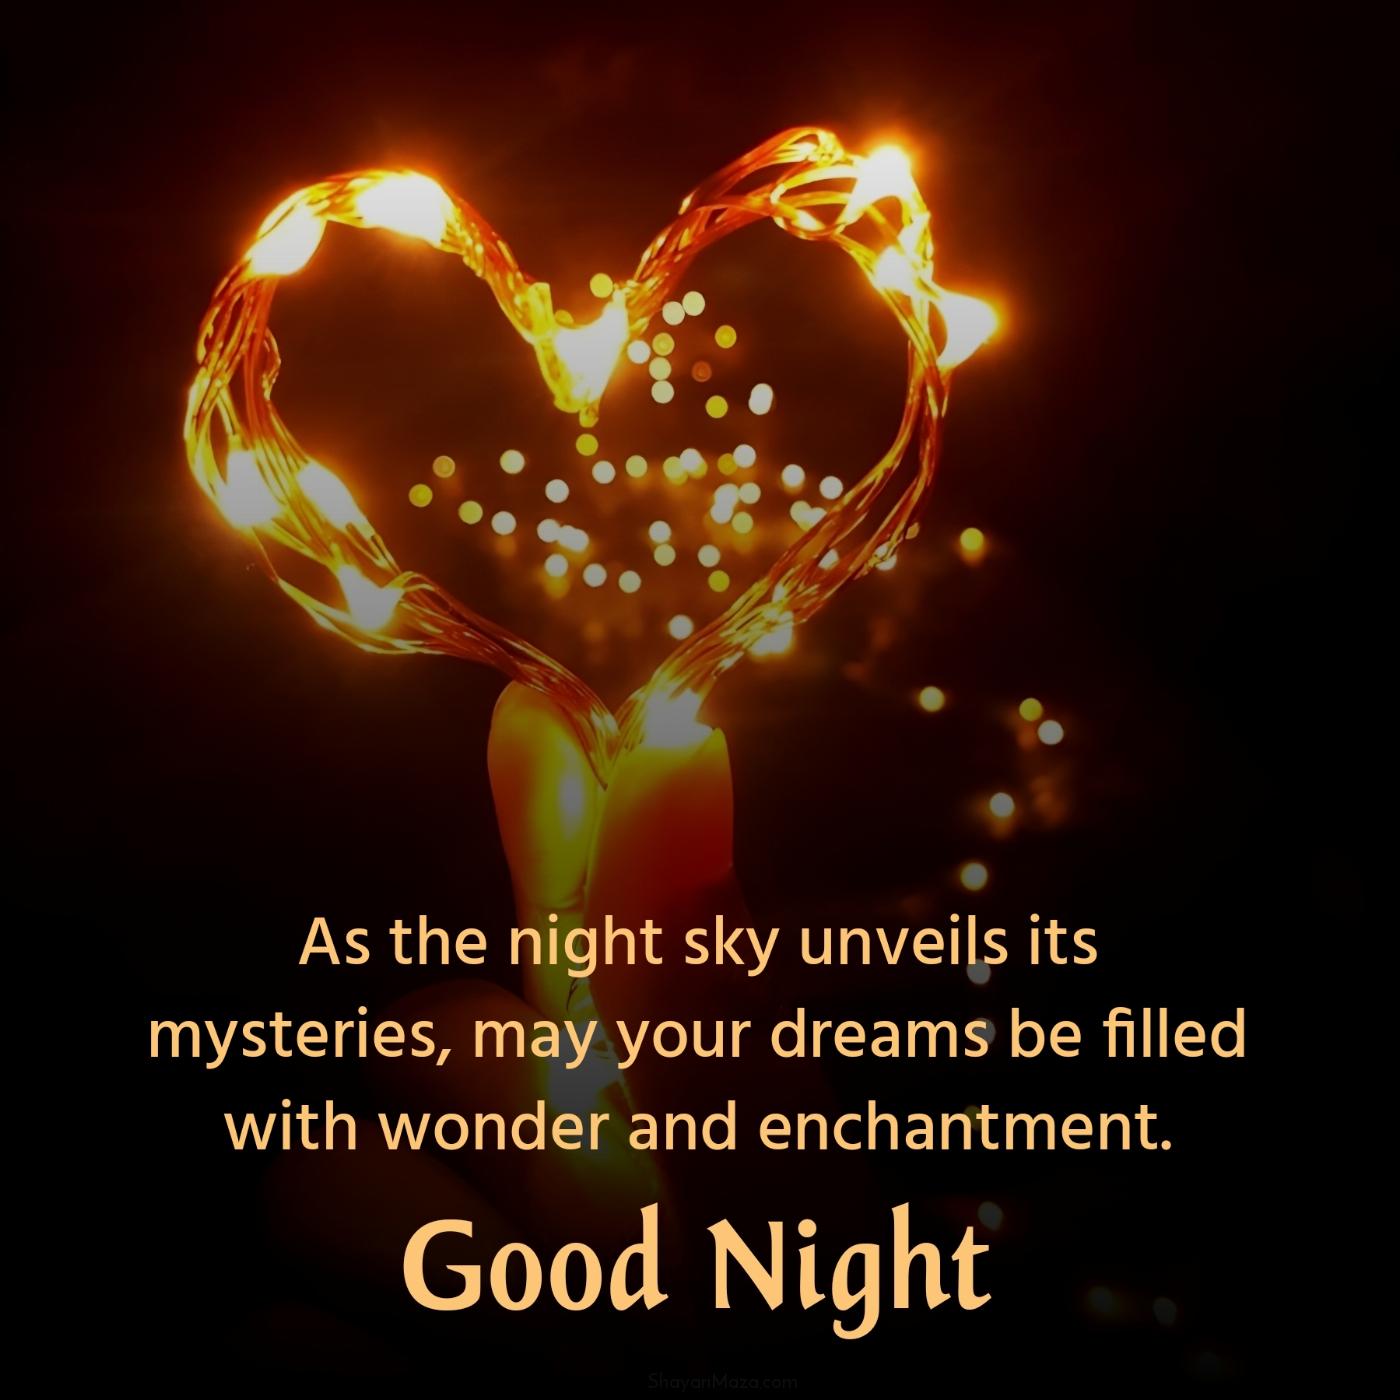 As the night sky unveils its mysteries may your dreams be filled